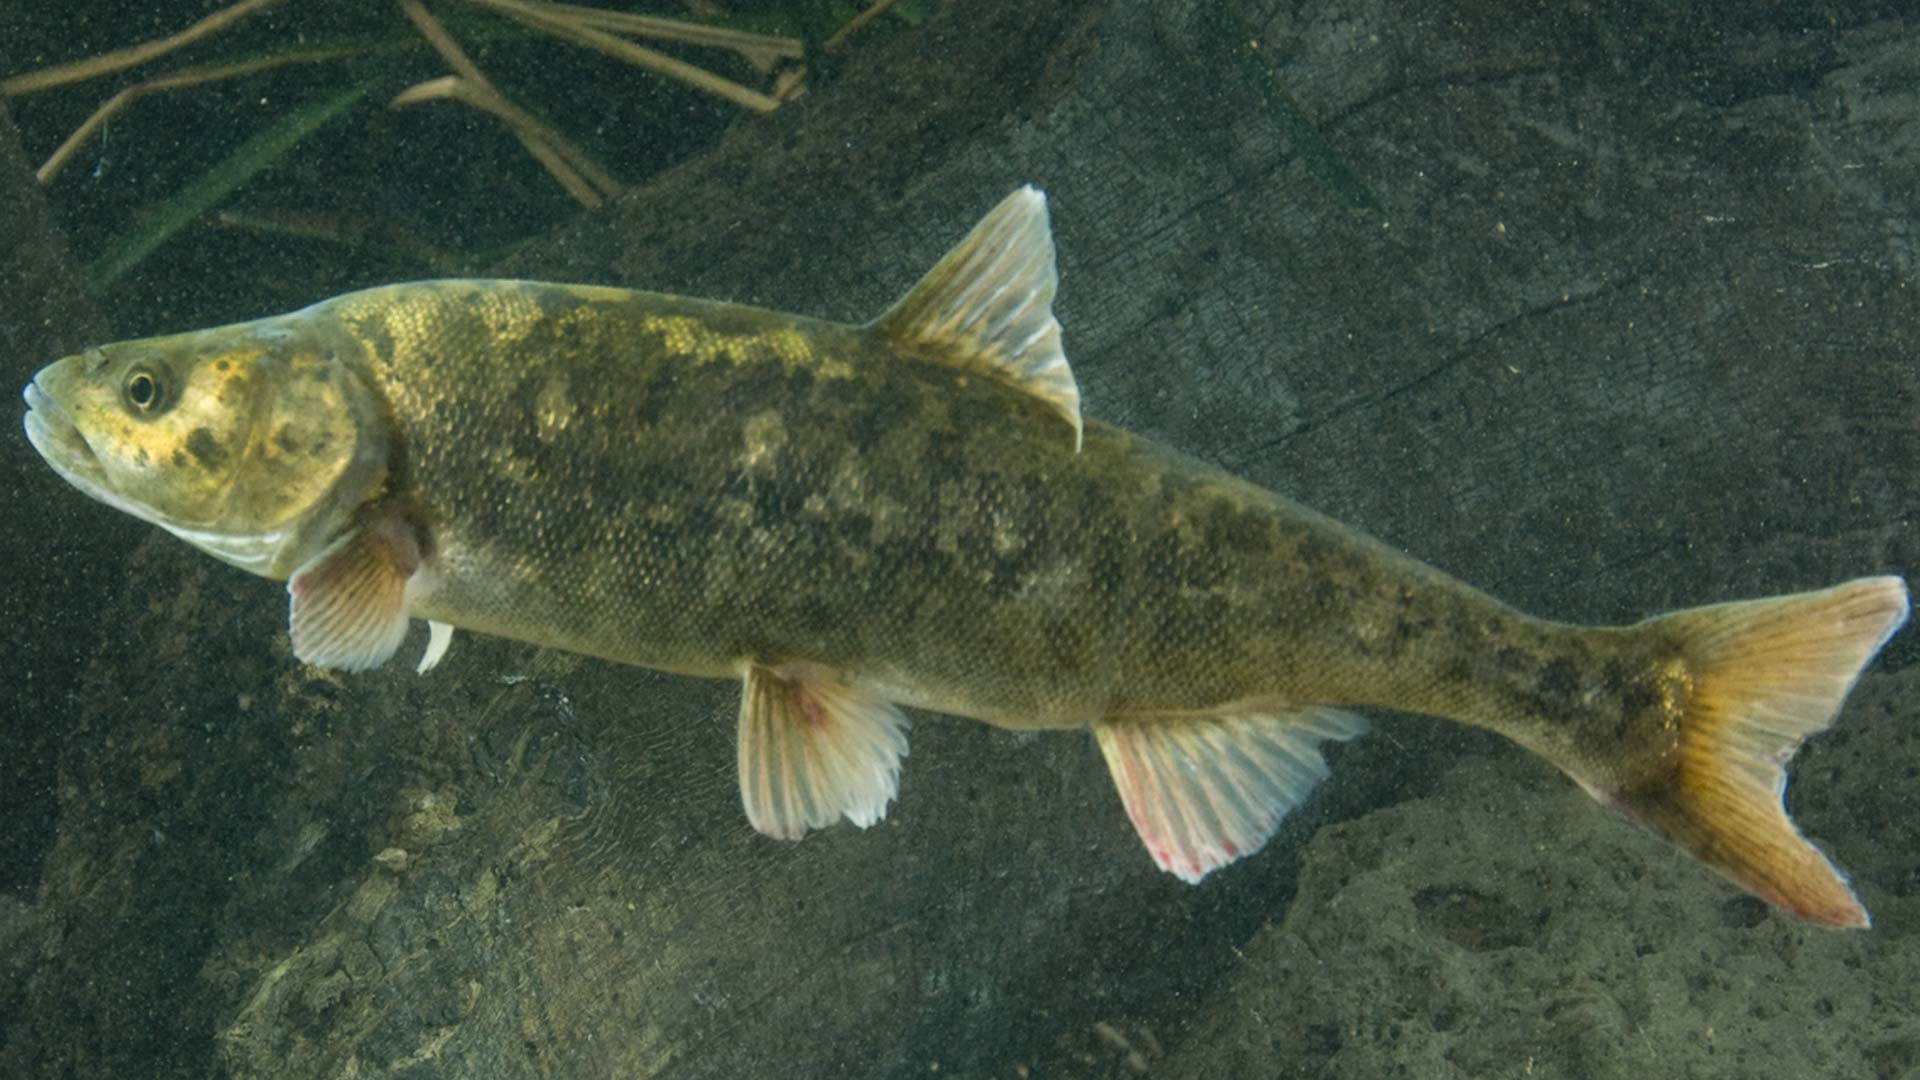 An adult roundtail chub.